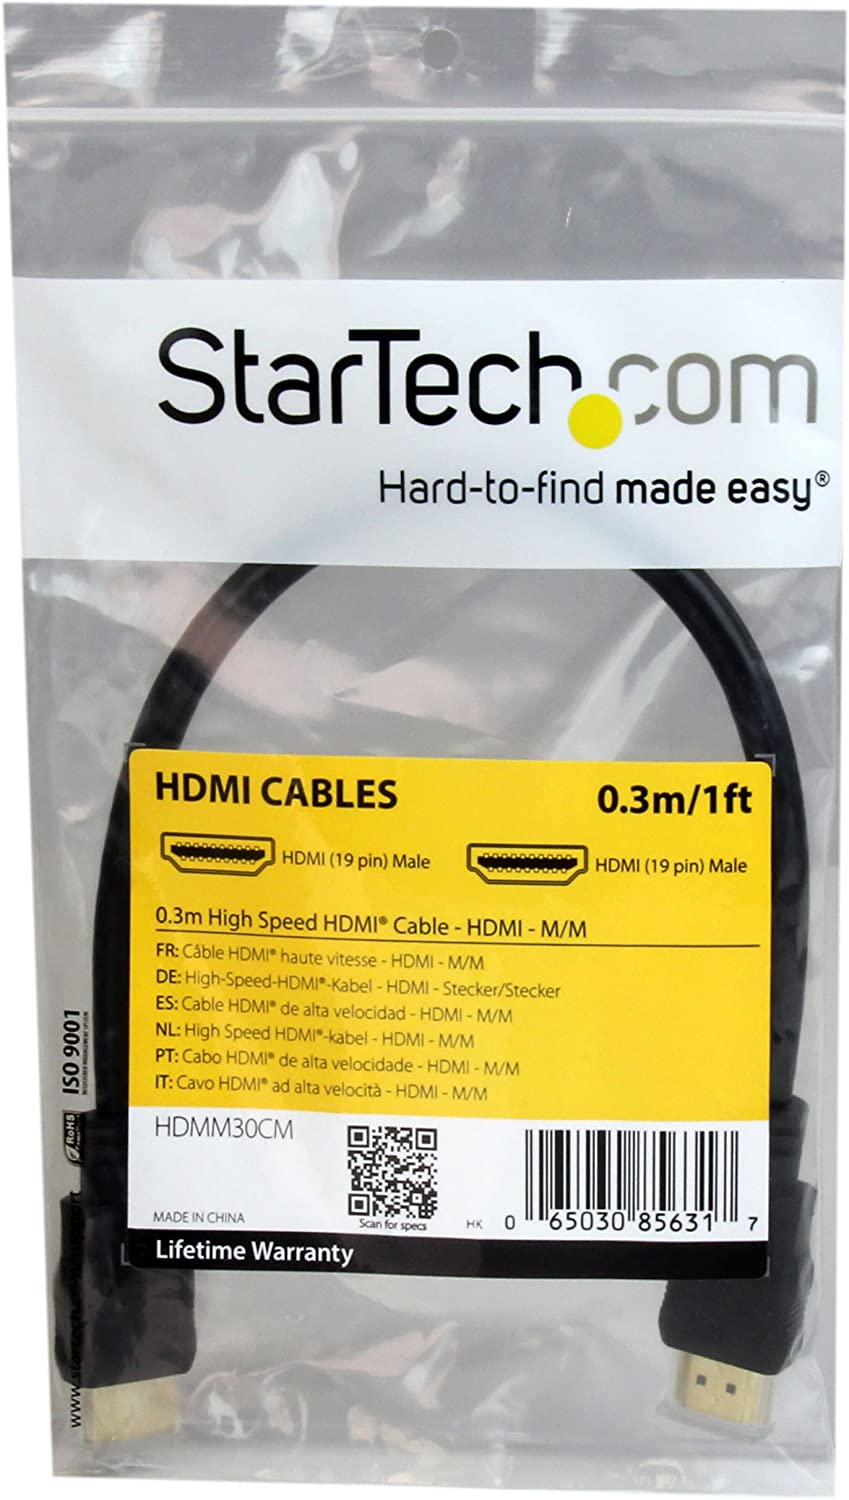 StarTech.com 0.3m 1ft Short High Speed HDMI Cable - Ultra HD 4k x 2k HDMI Cable - HDMI M/M - 30cm HDMI 1.4 Cable - Audio/Video Gold-Plated (HDMM30CM),Black 0.3 meter